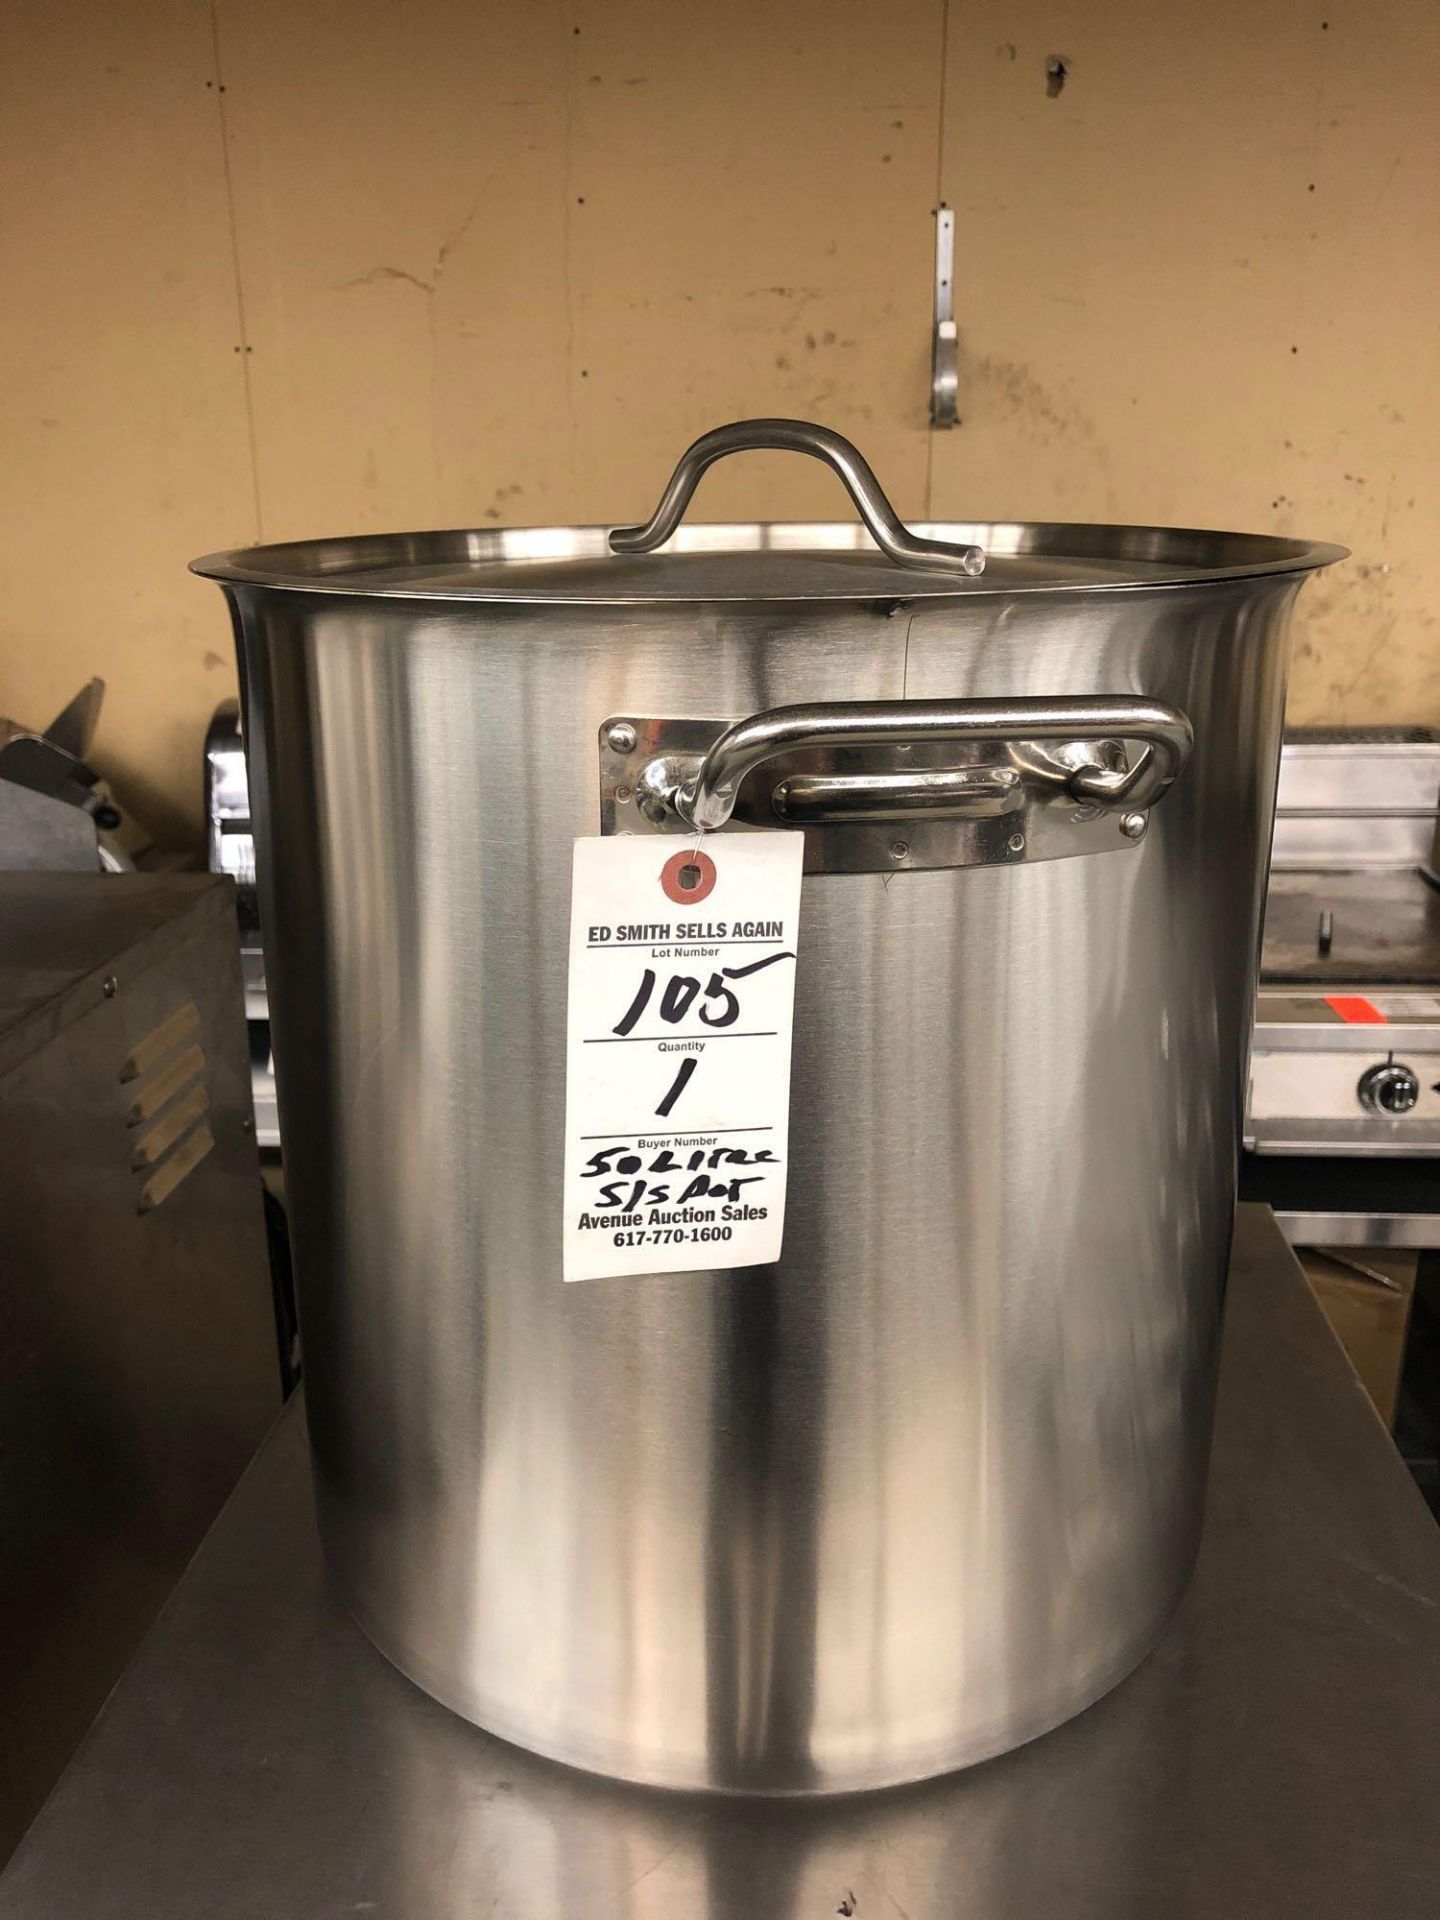 51 L stainless steel stockpot with cover